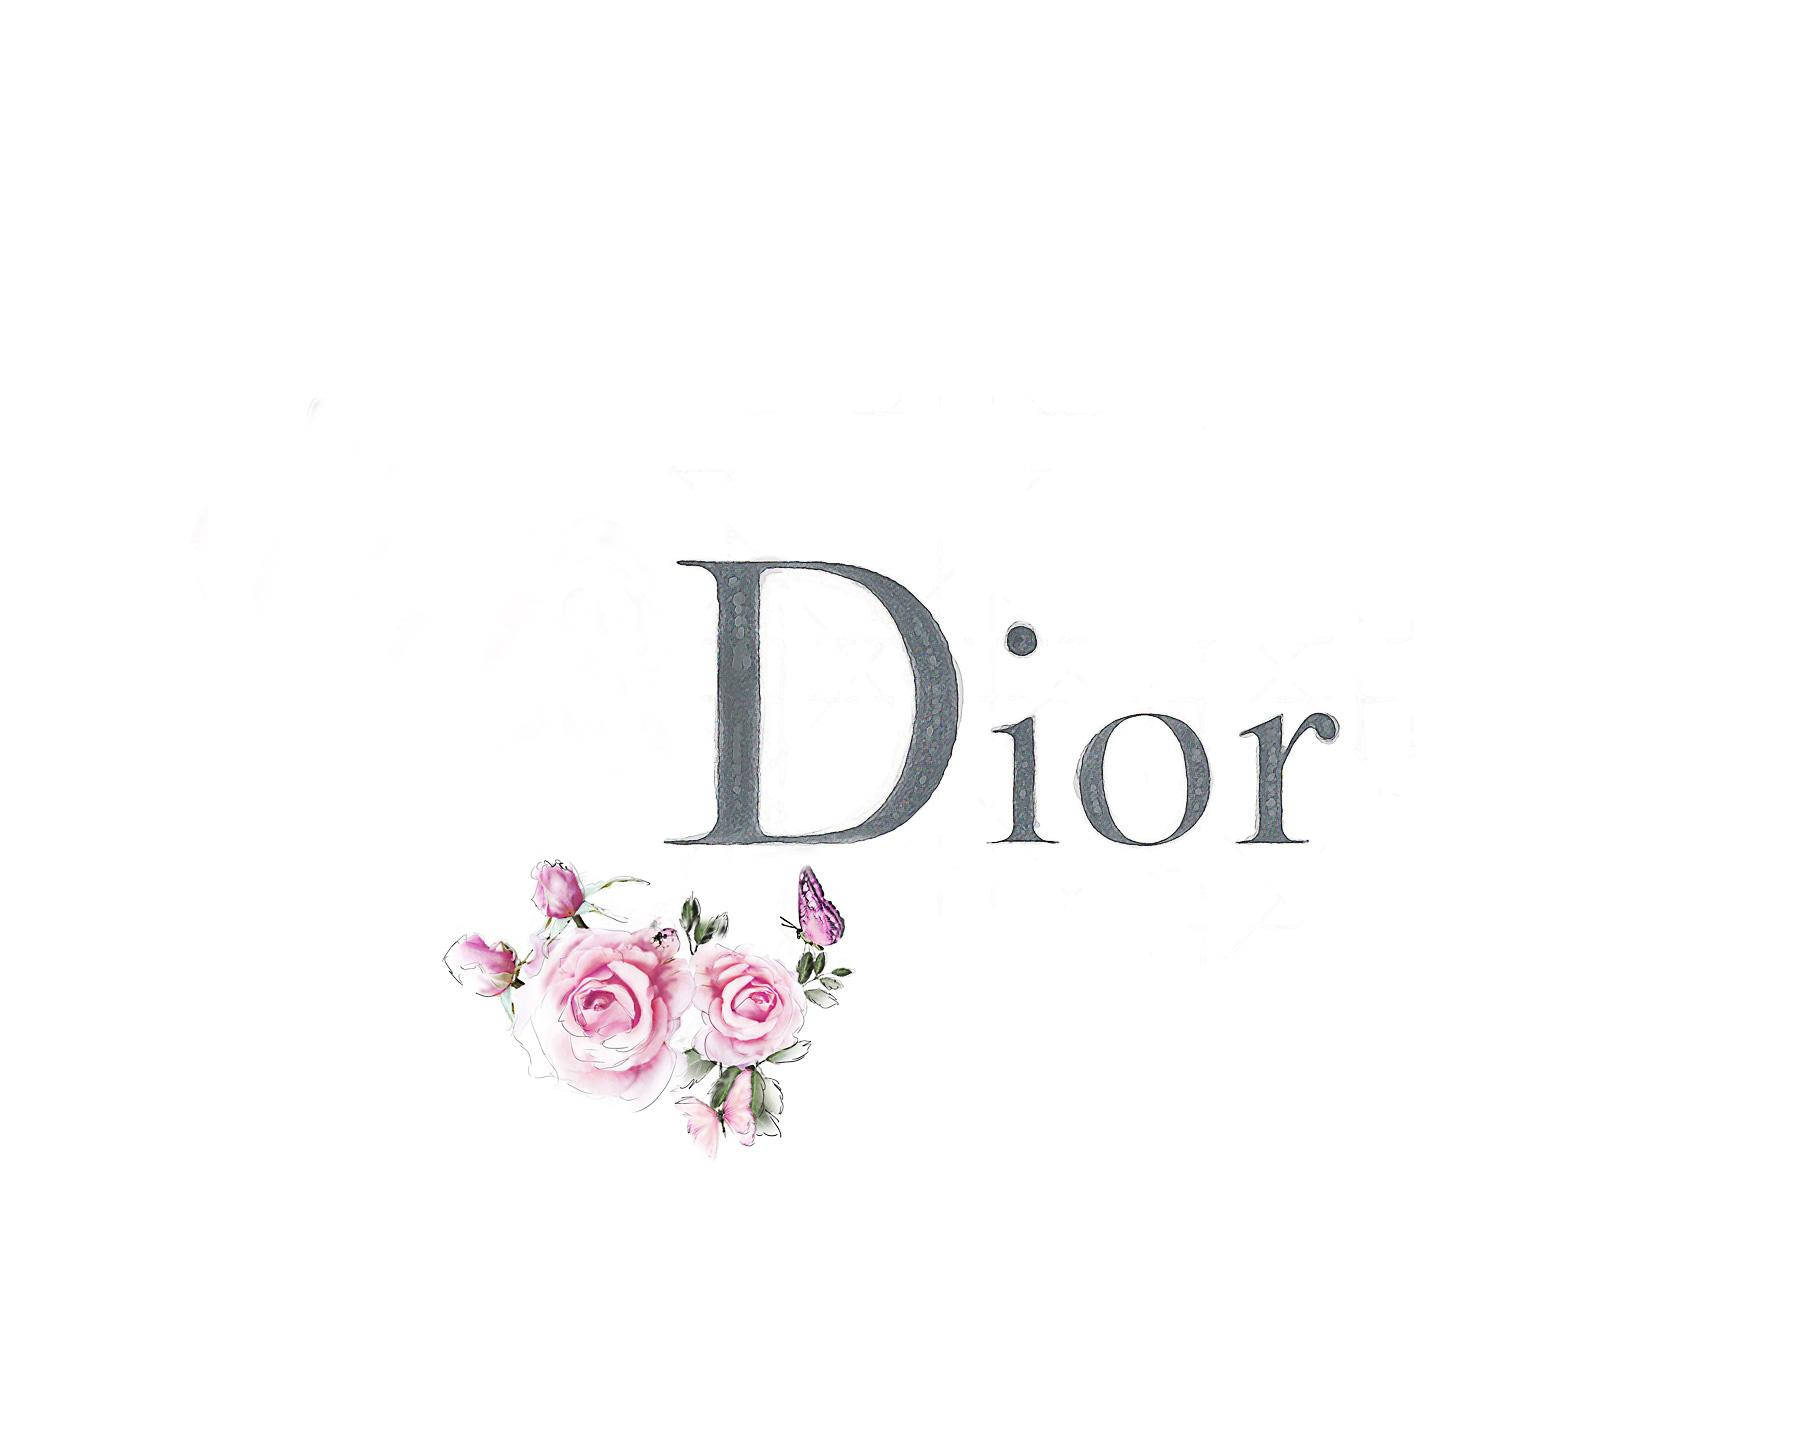 Dior Logo With Flowers Wallpaper